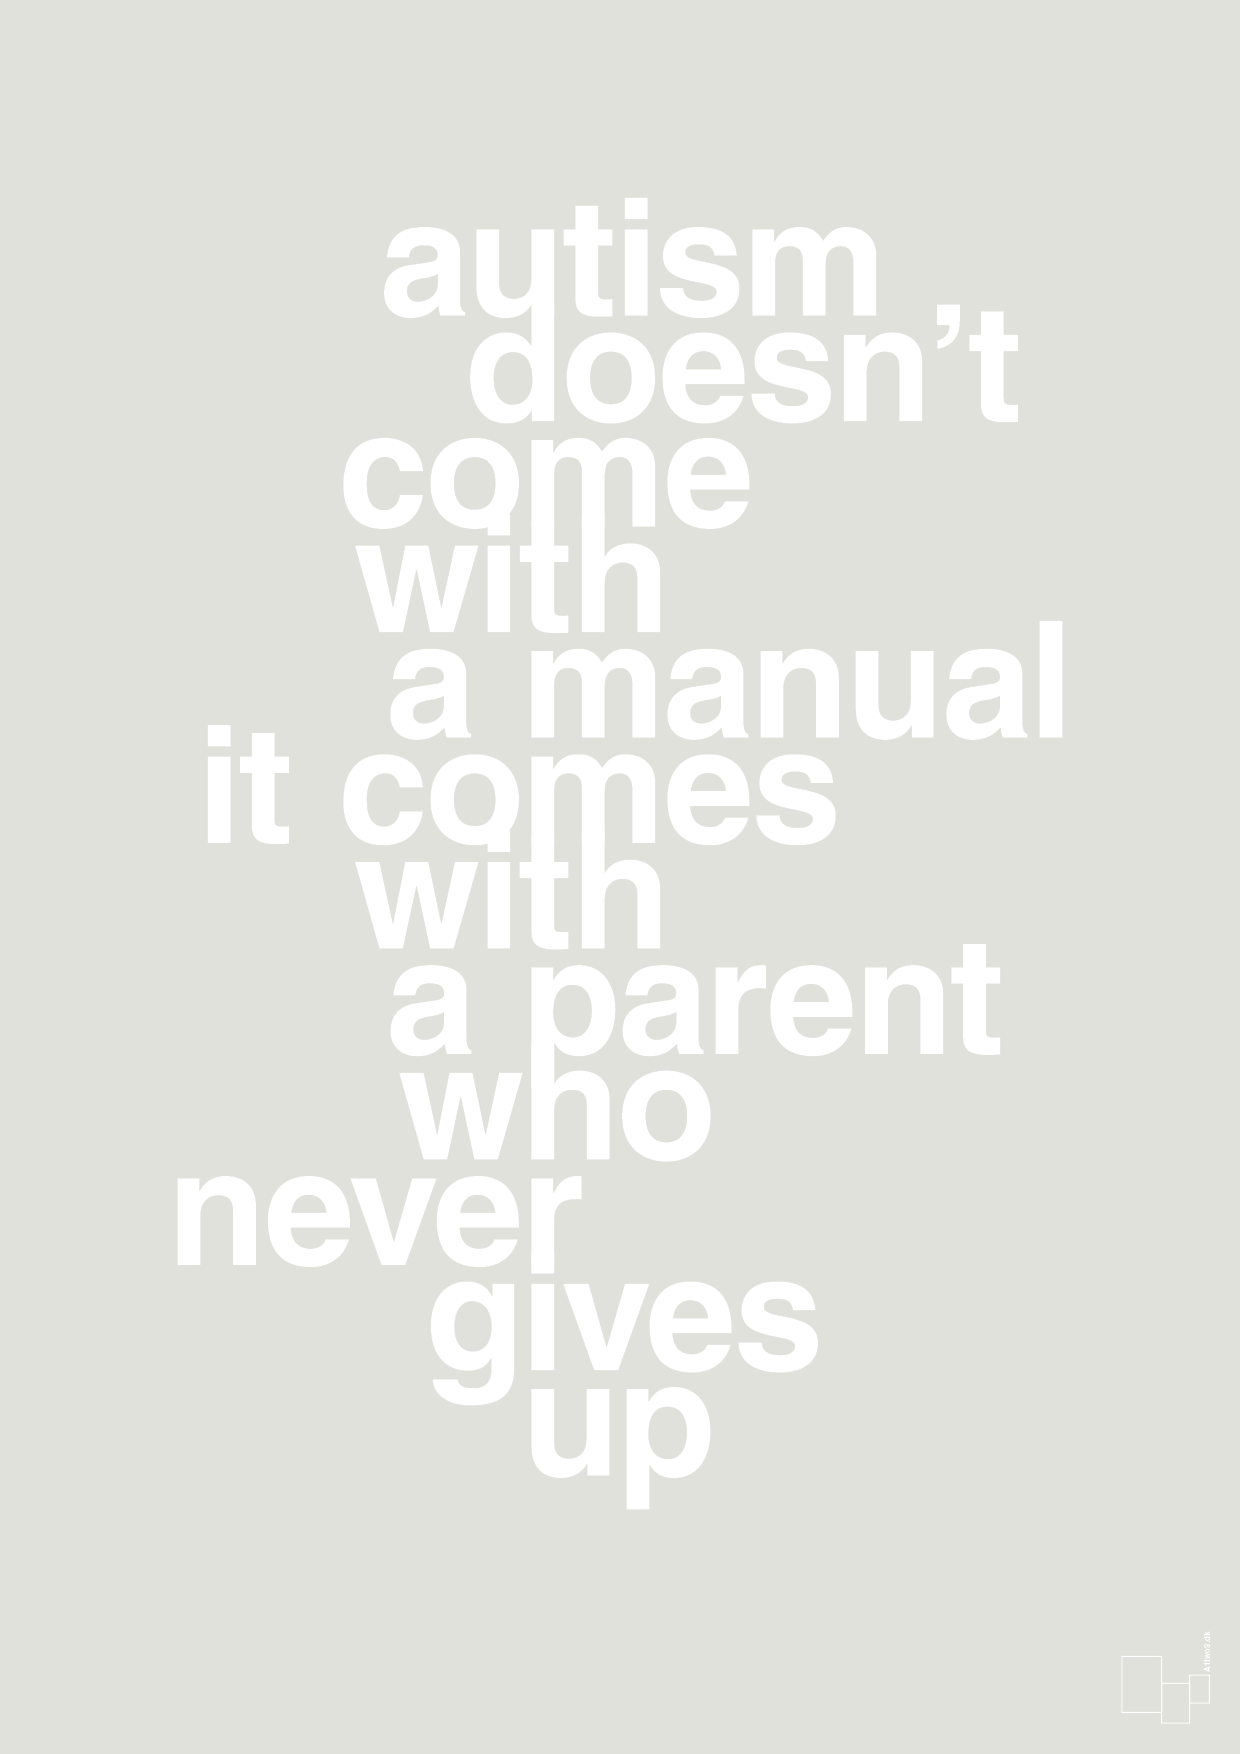 autism doesnt come with a manual it comes with a parent who never gives up - Plakat med Samfund i Painters White